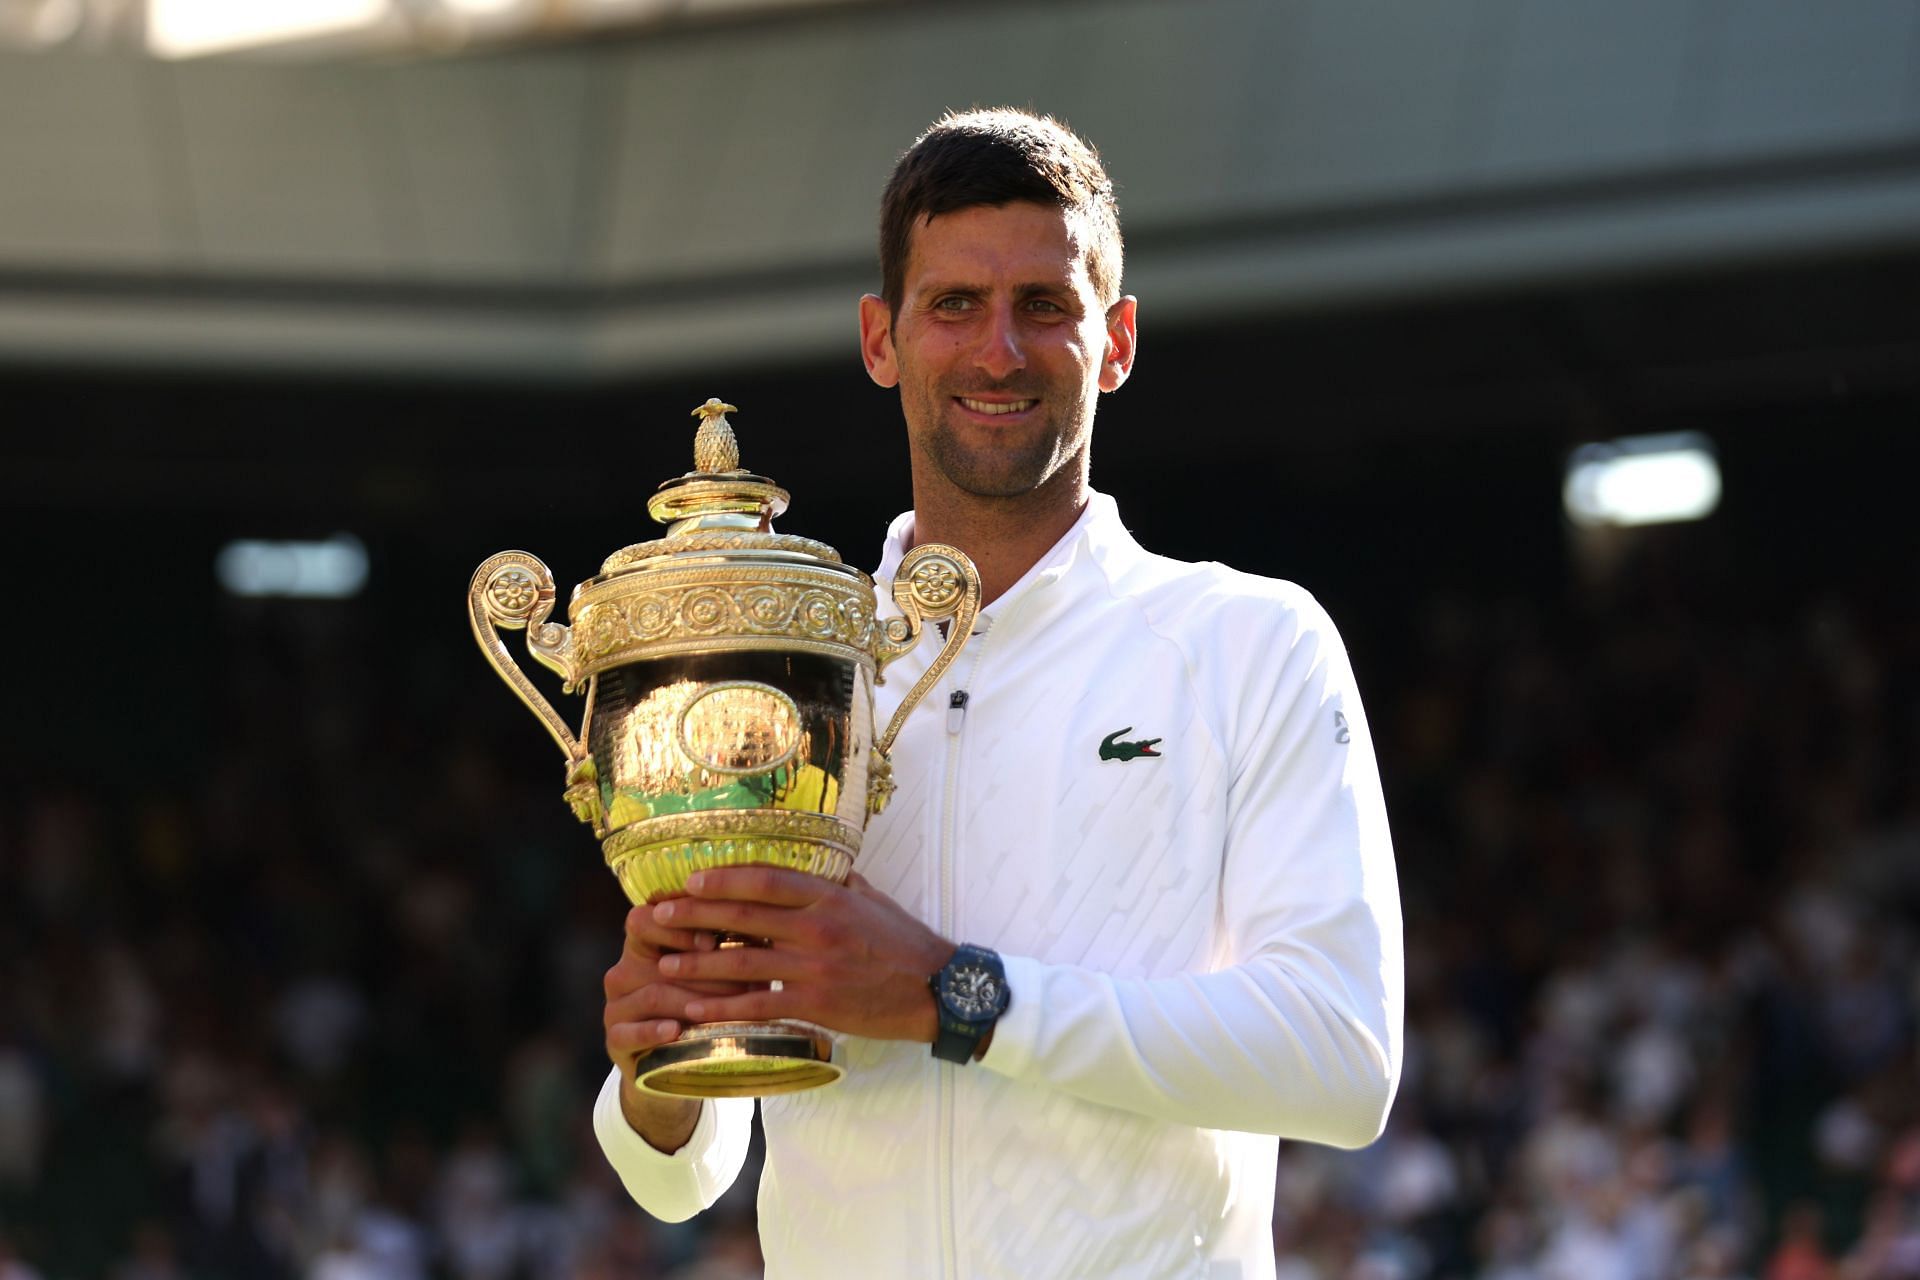 Wimbledon 2023: Where to watch, TV schedule, live streaming details, and more